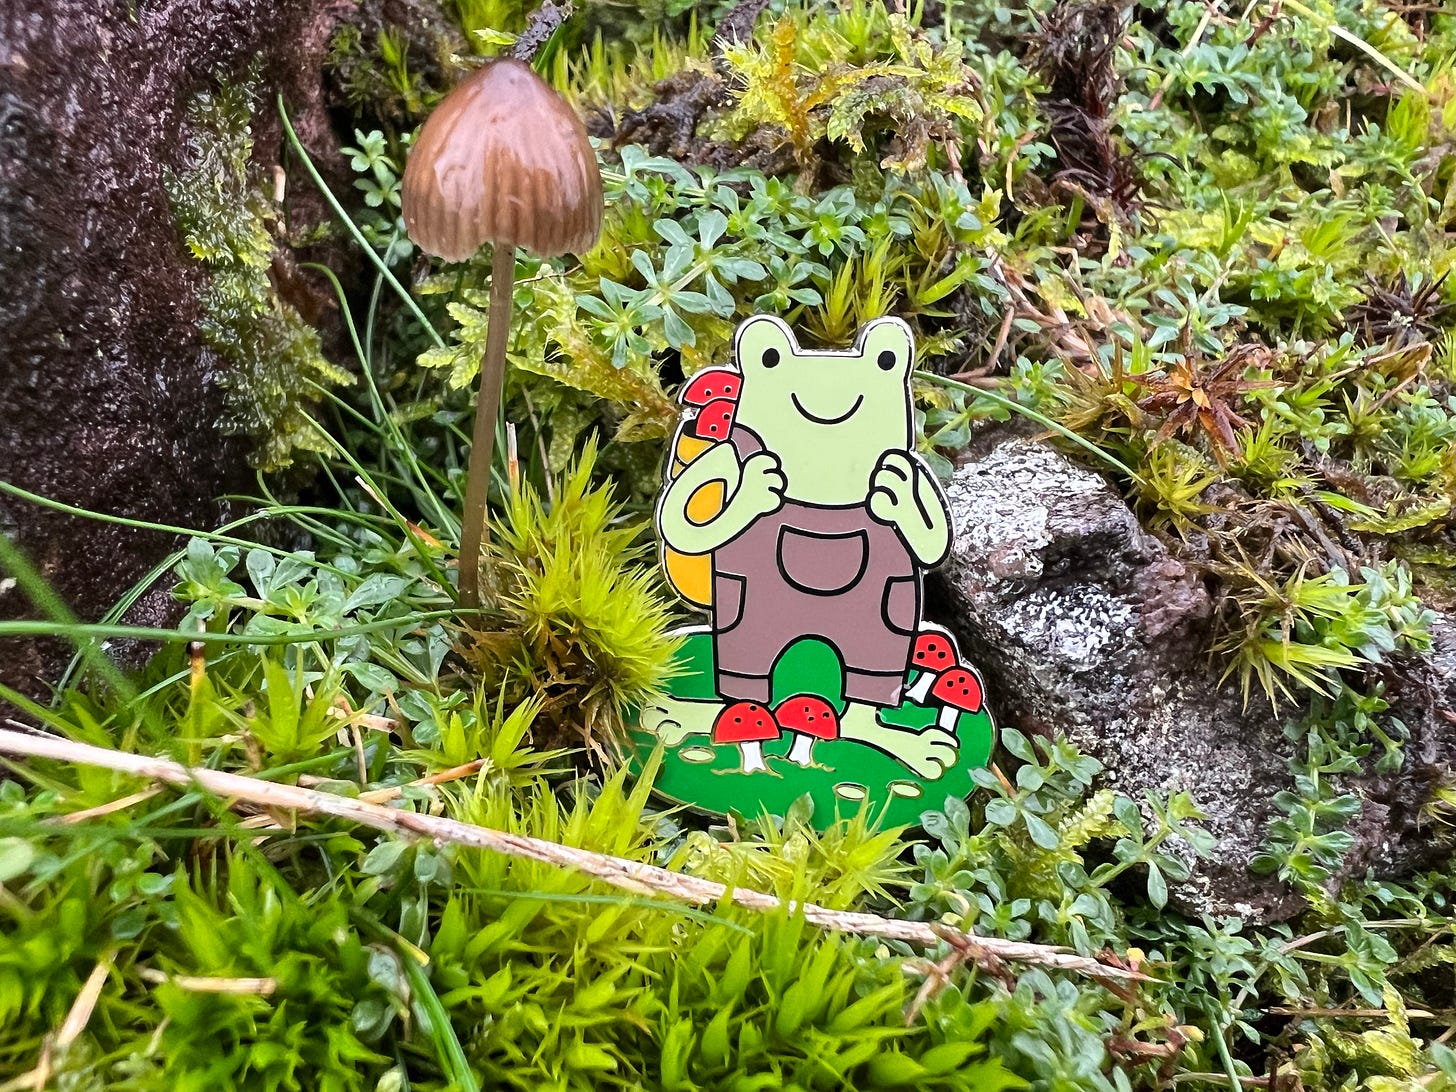 An enamel pin of a foraging frog in dungarees standing among red mushrooms